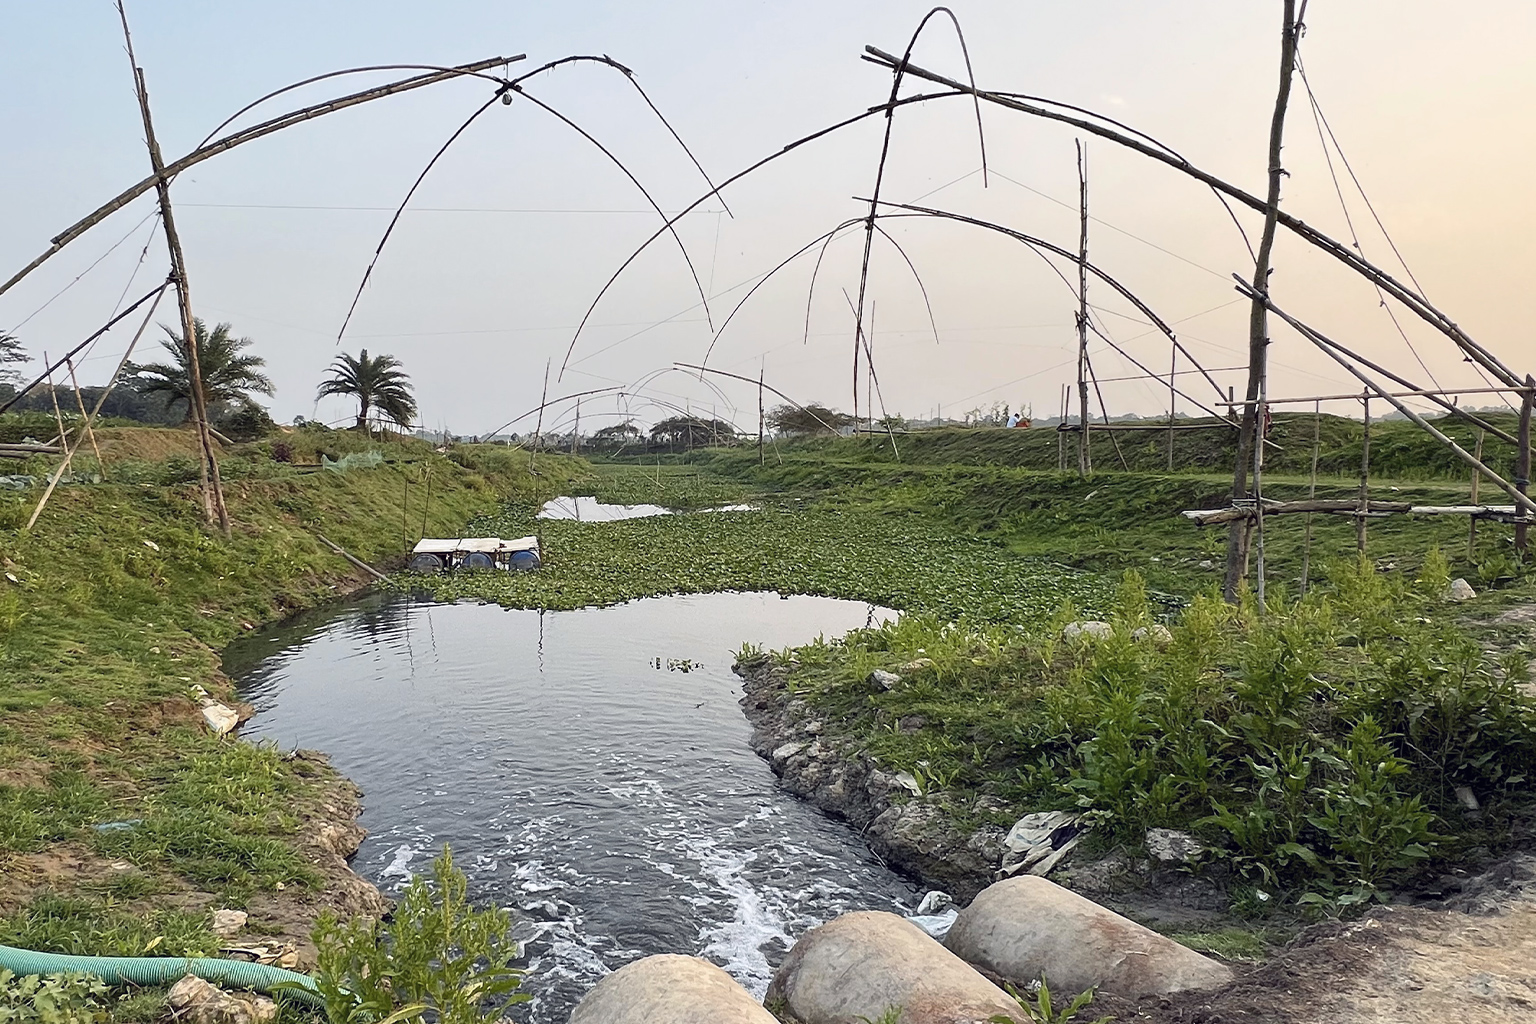 Fishing rods set in a water canal that also has industrial waste let into it.